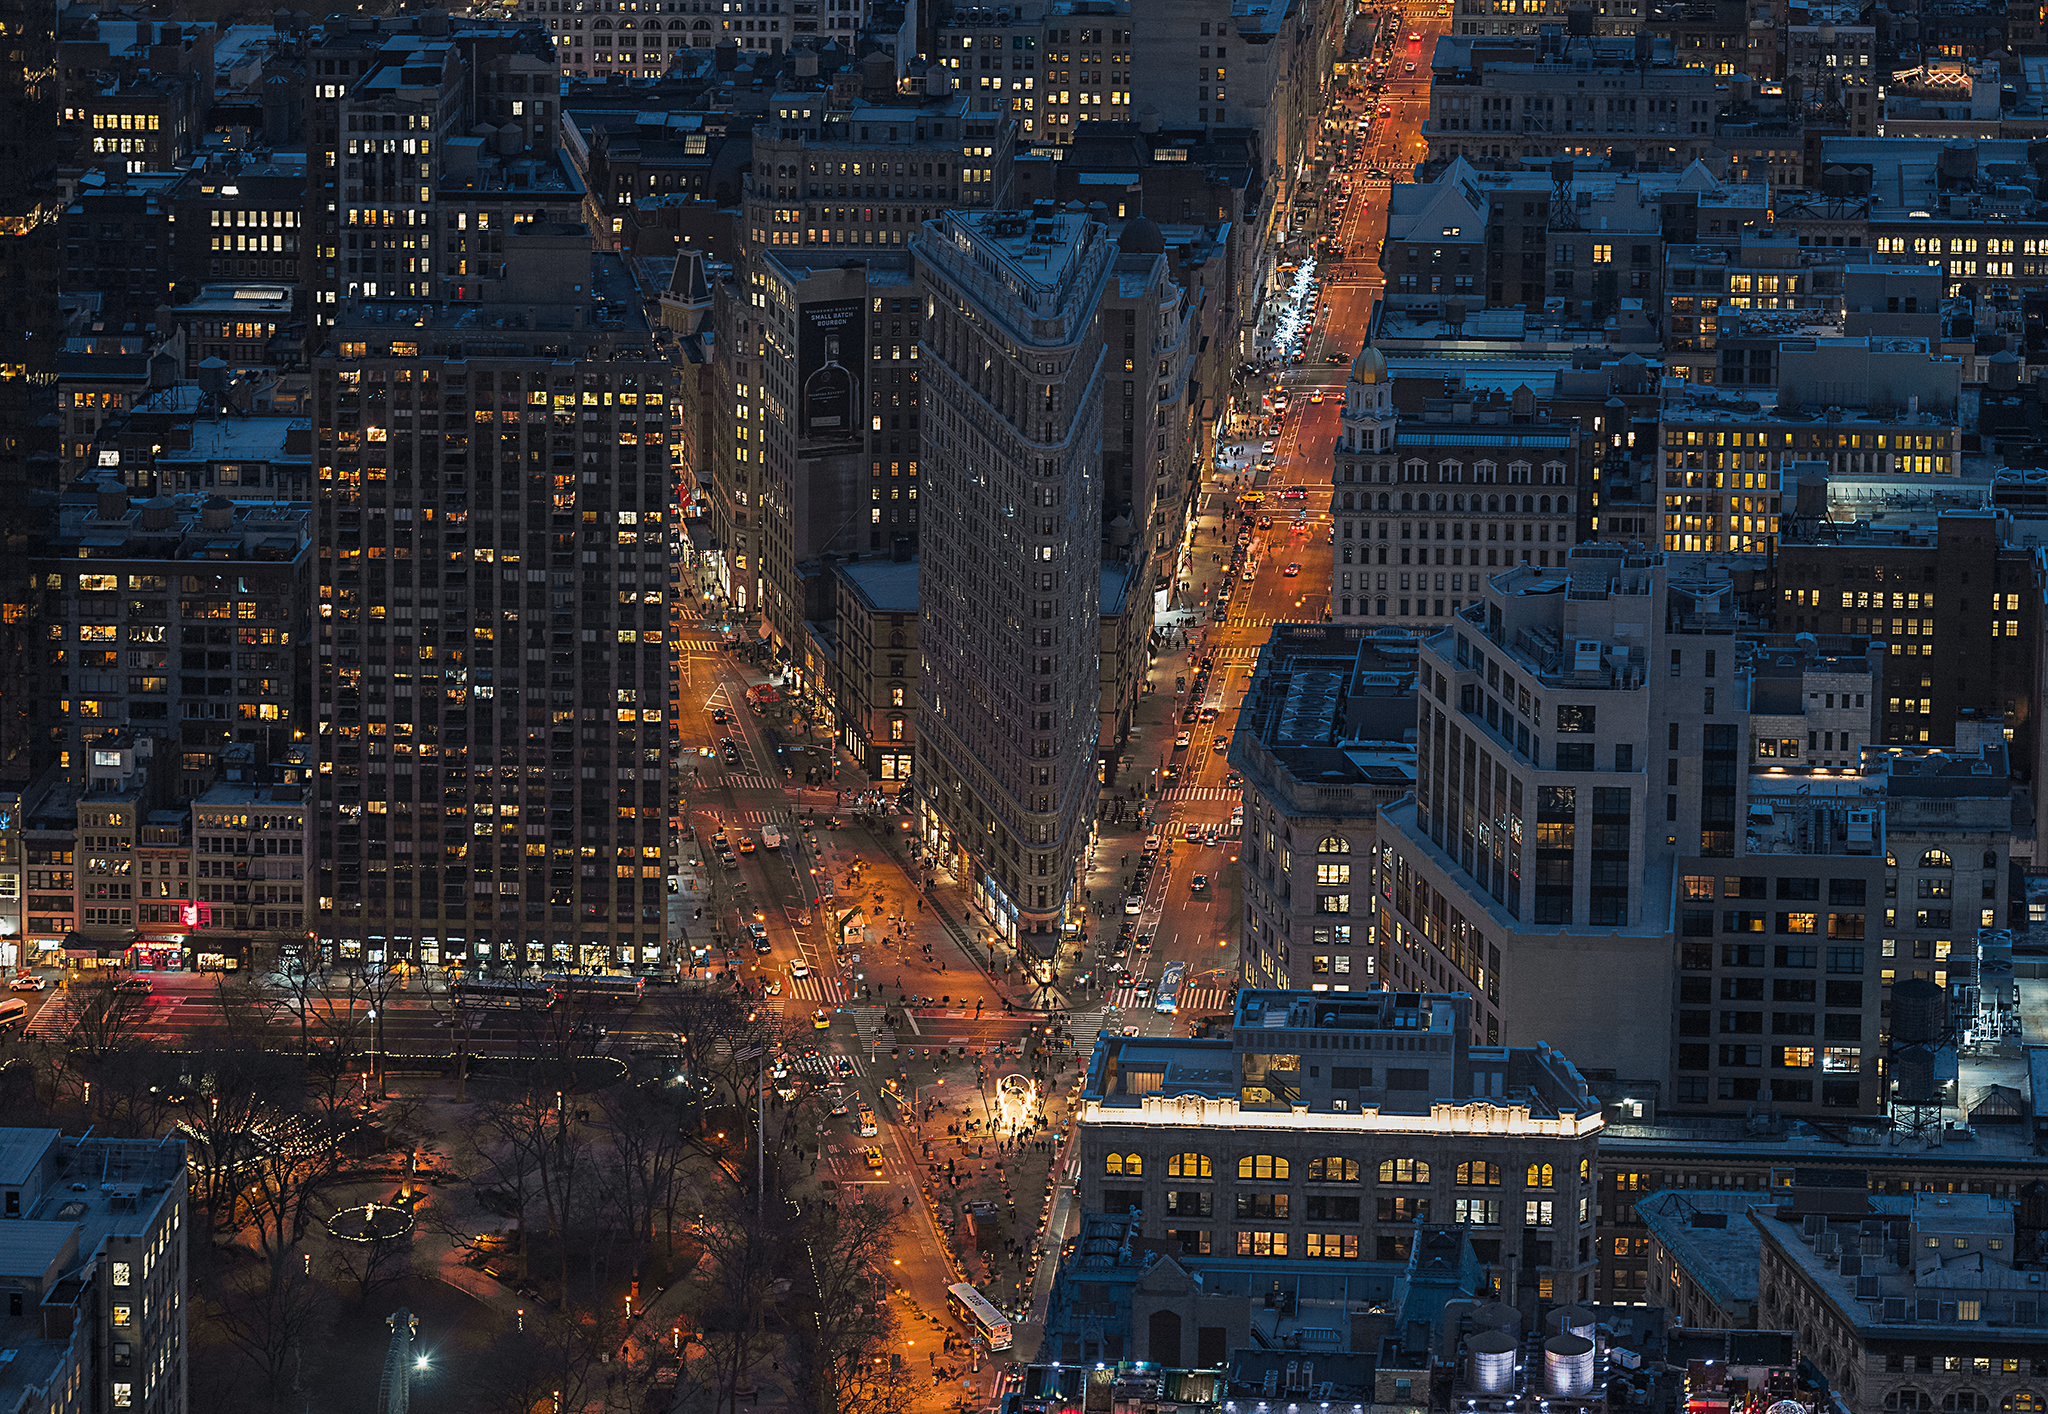 Flatiron Building from The Empire State - NYC